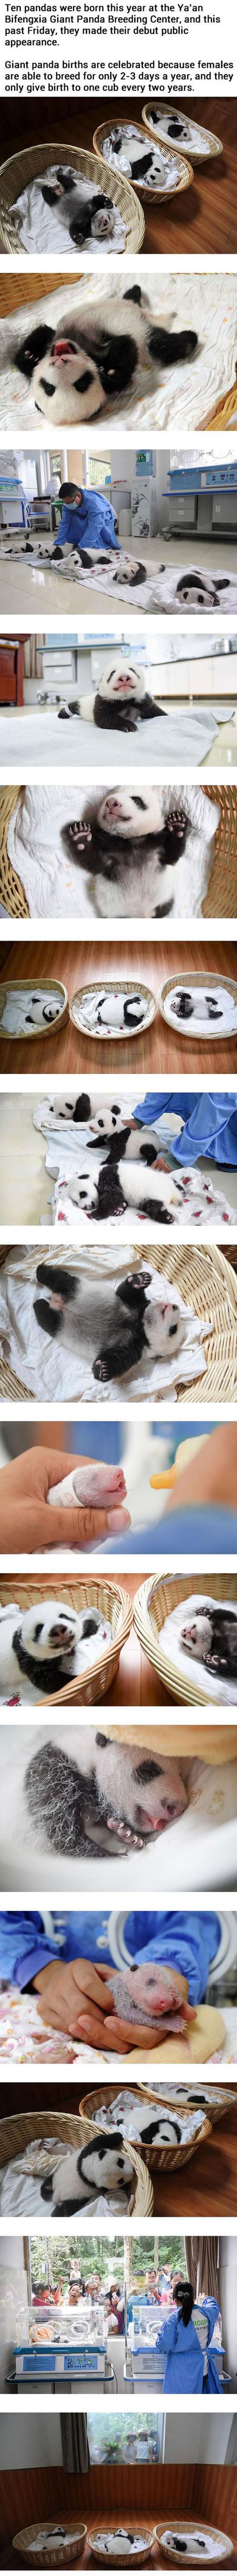 Meanwhile At The Chinese Panda Breeding Center